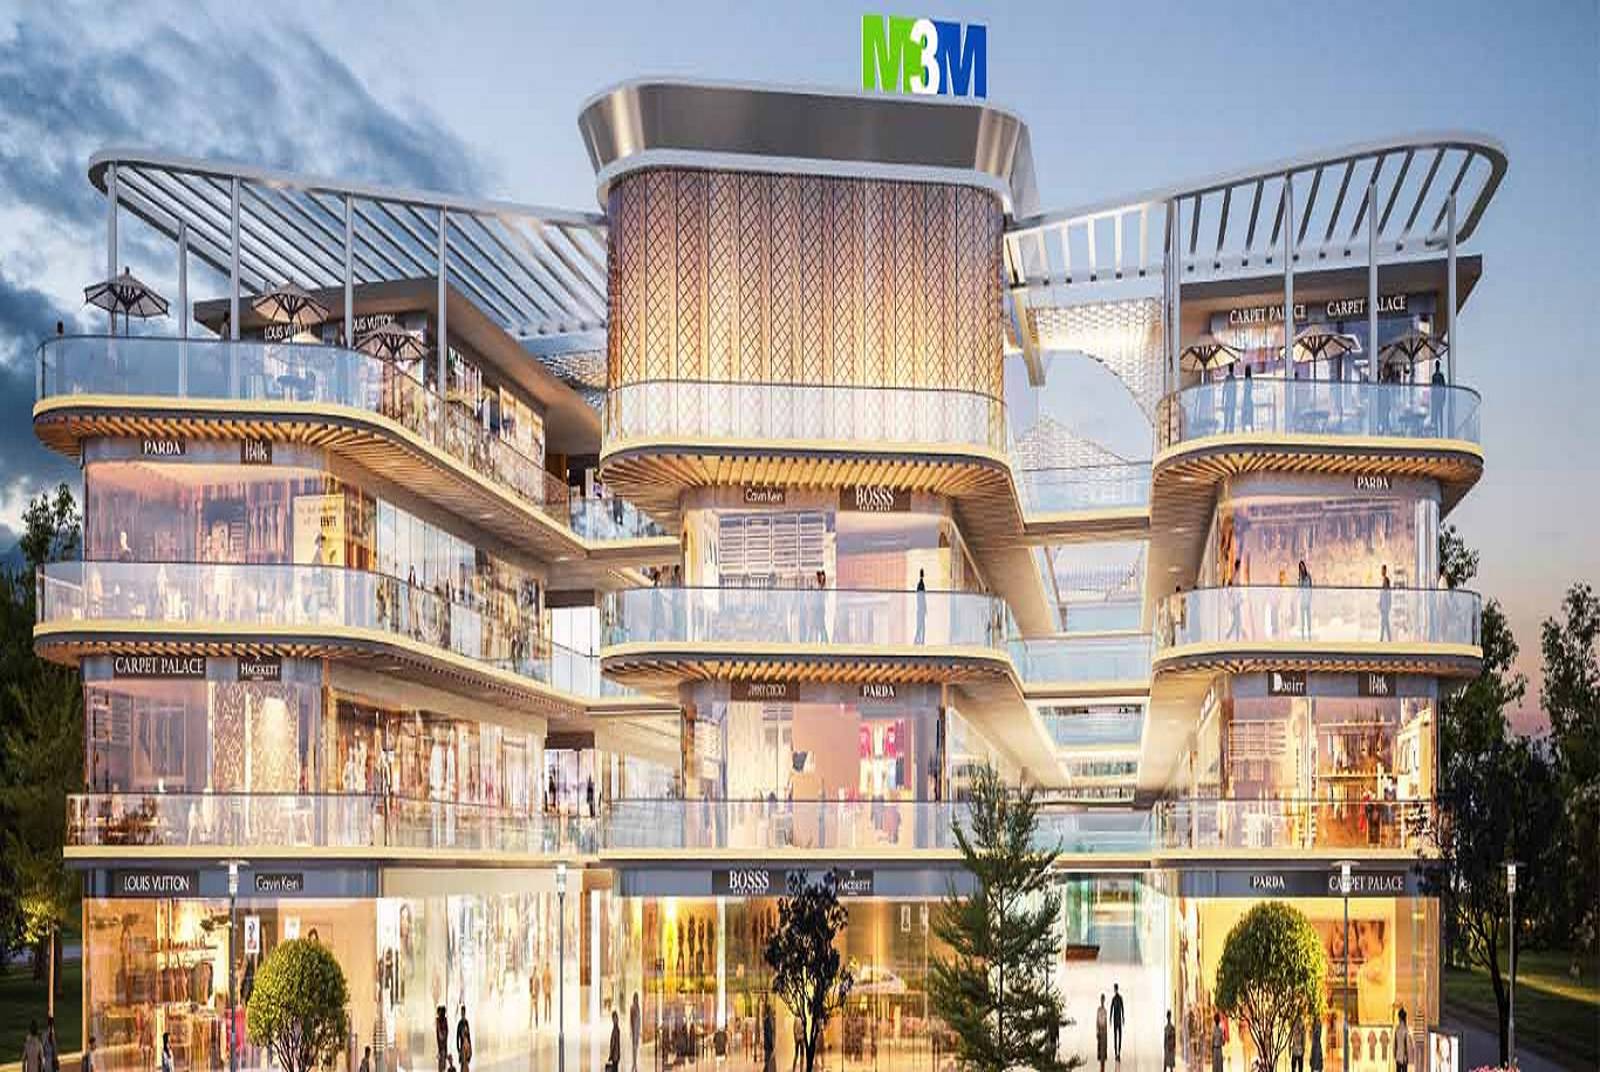 M3M India Acquires 1.3 acres of Land in Gurugram for Rs 200 Acre to Develop Luxury Boutique Retail Project